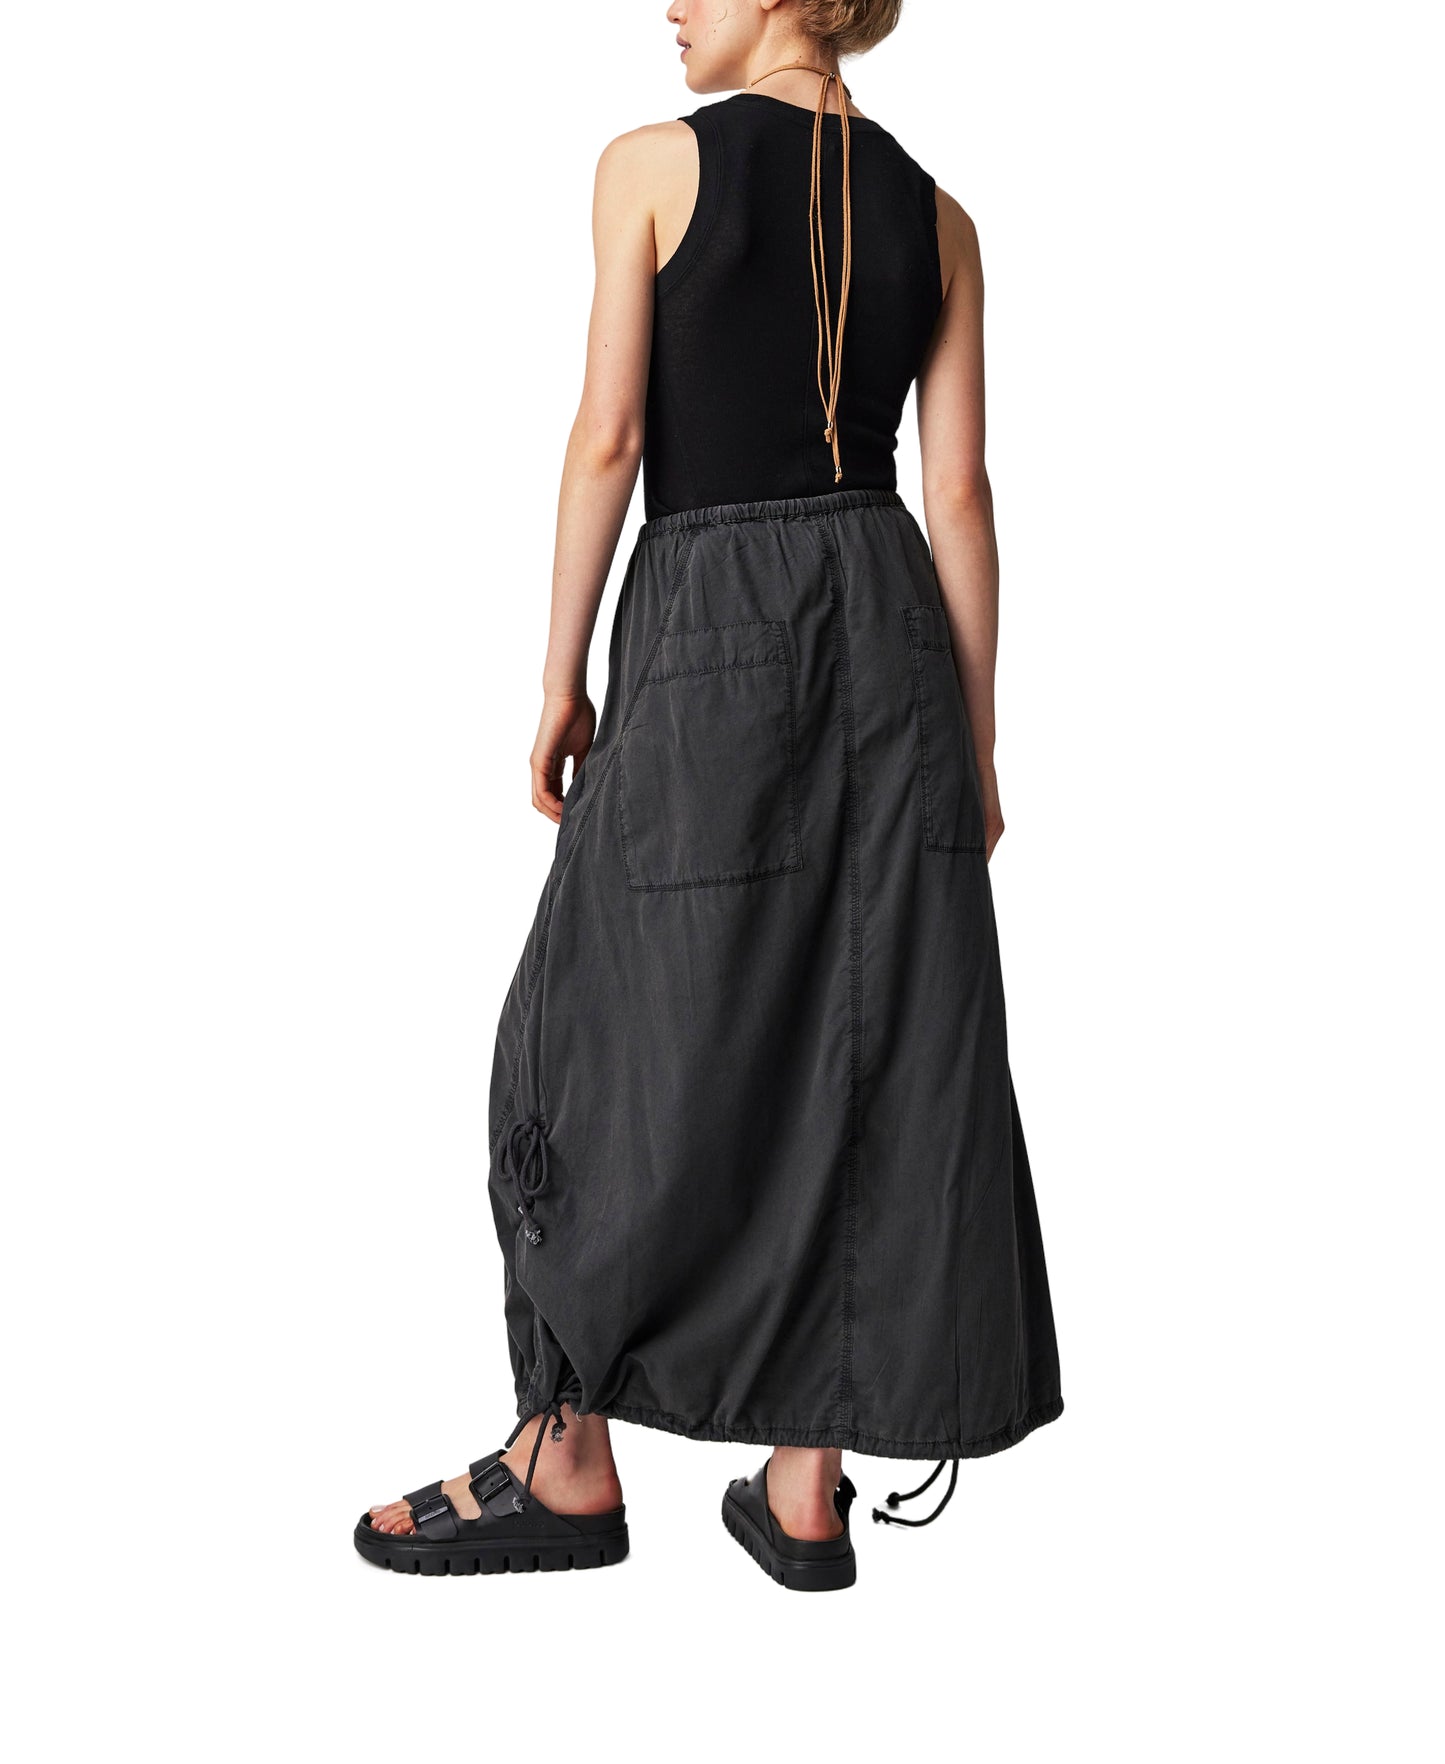 FREE PEOPLE PICTURE PERFECT PARACHUTE MAXI SKIRT